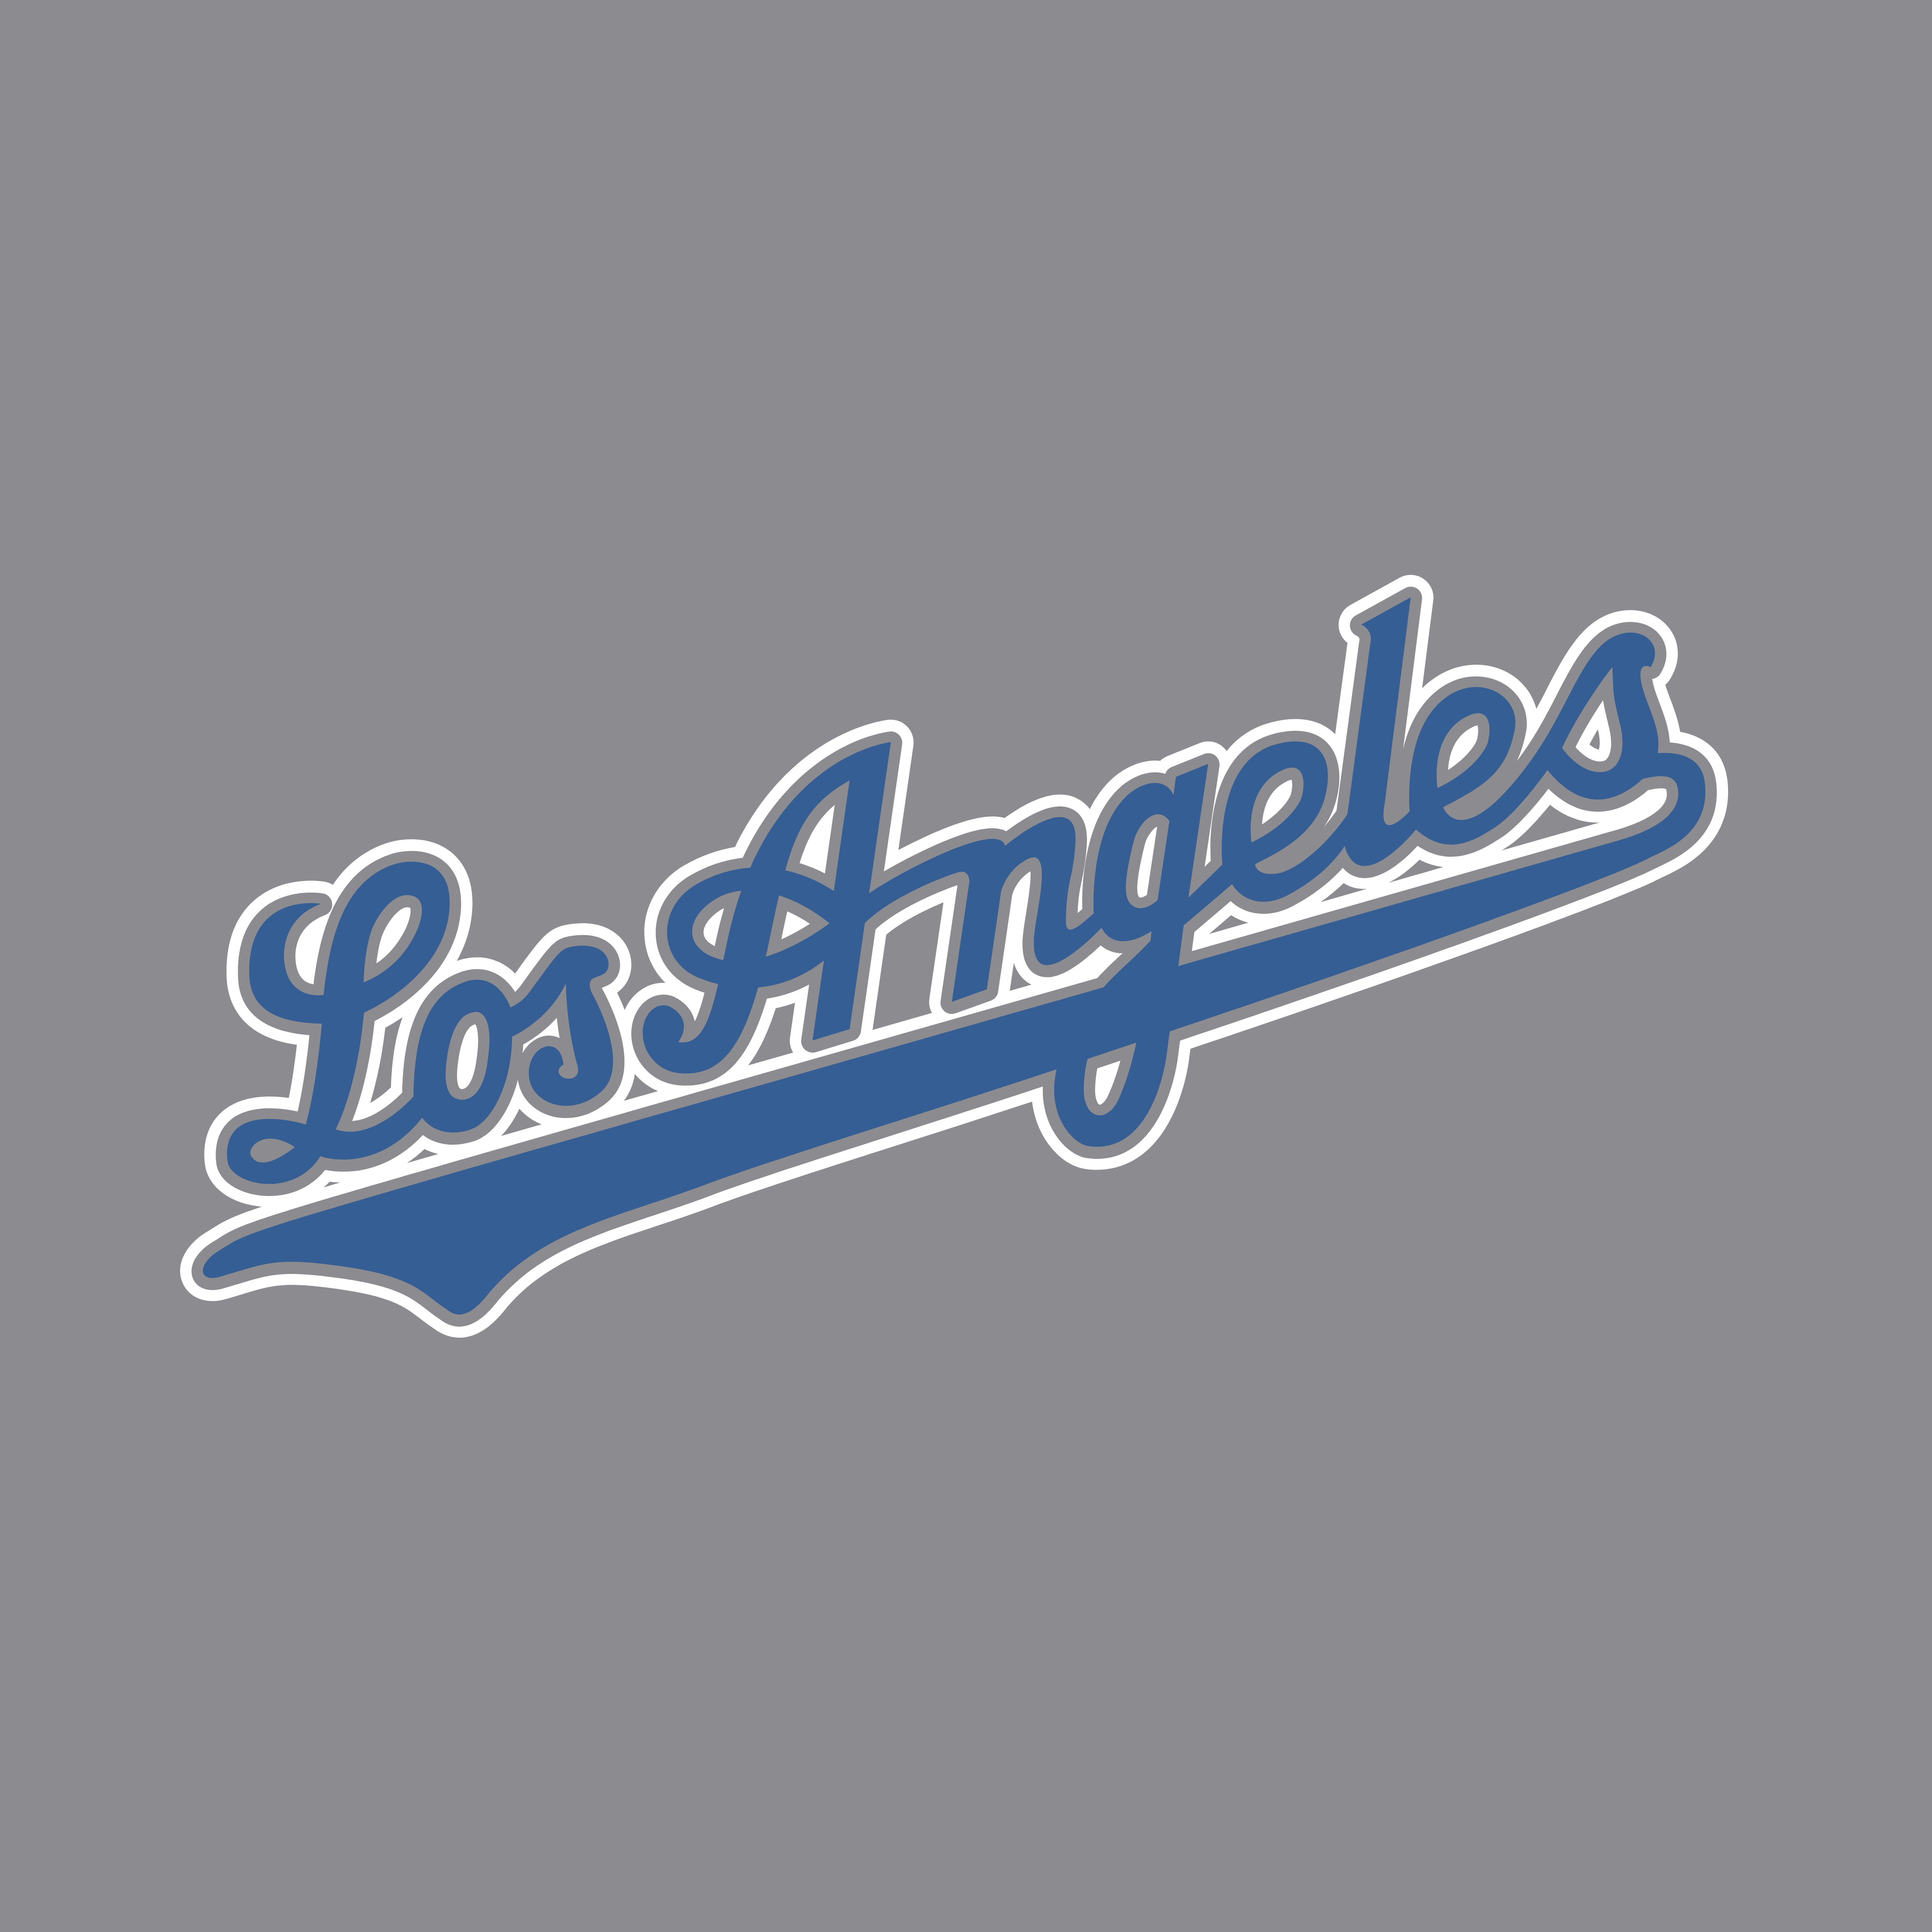 Los Angeles Dodgers – Logos Download, Los Angeles Dodgers Logo PNG - Free PNG